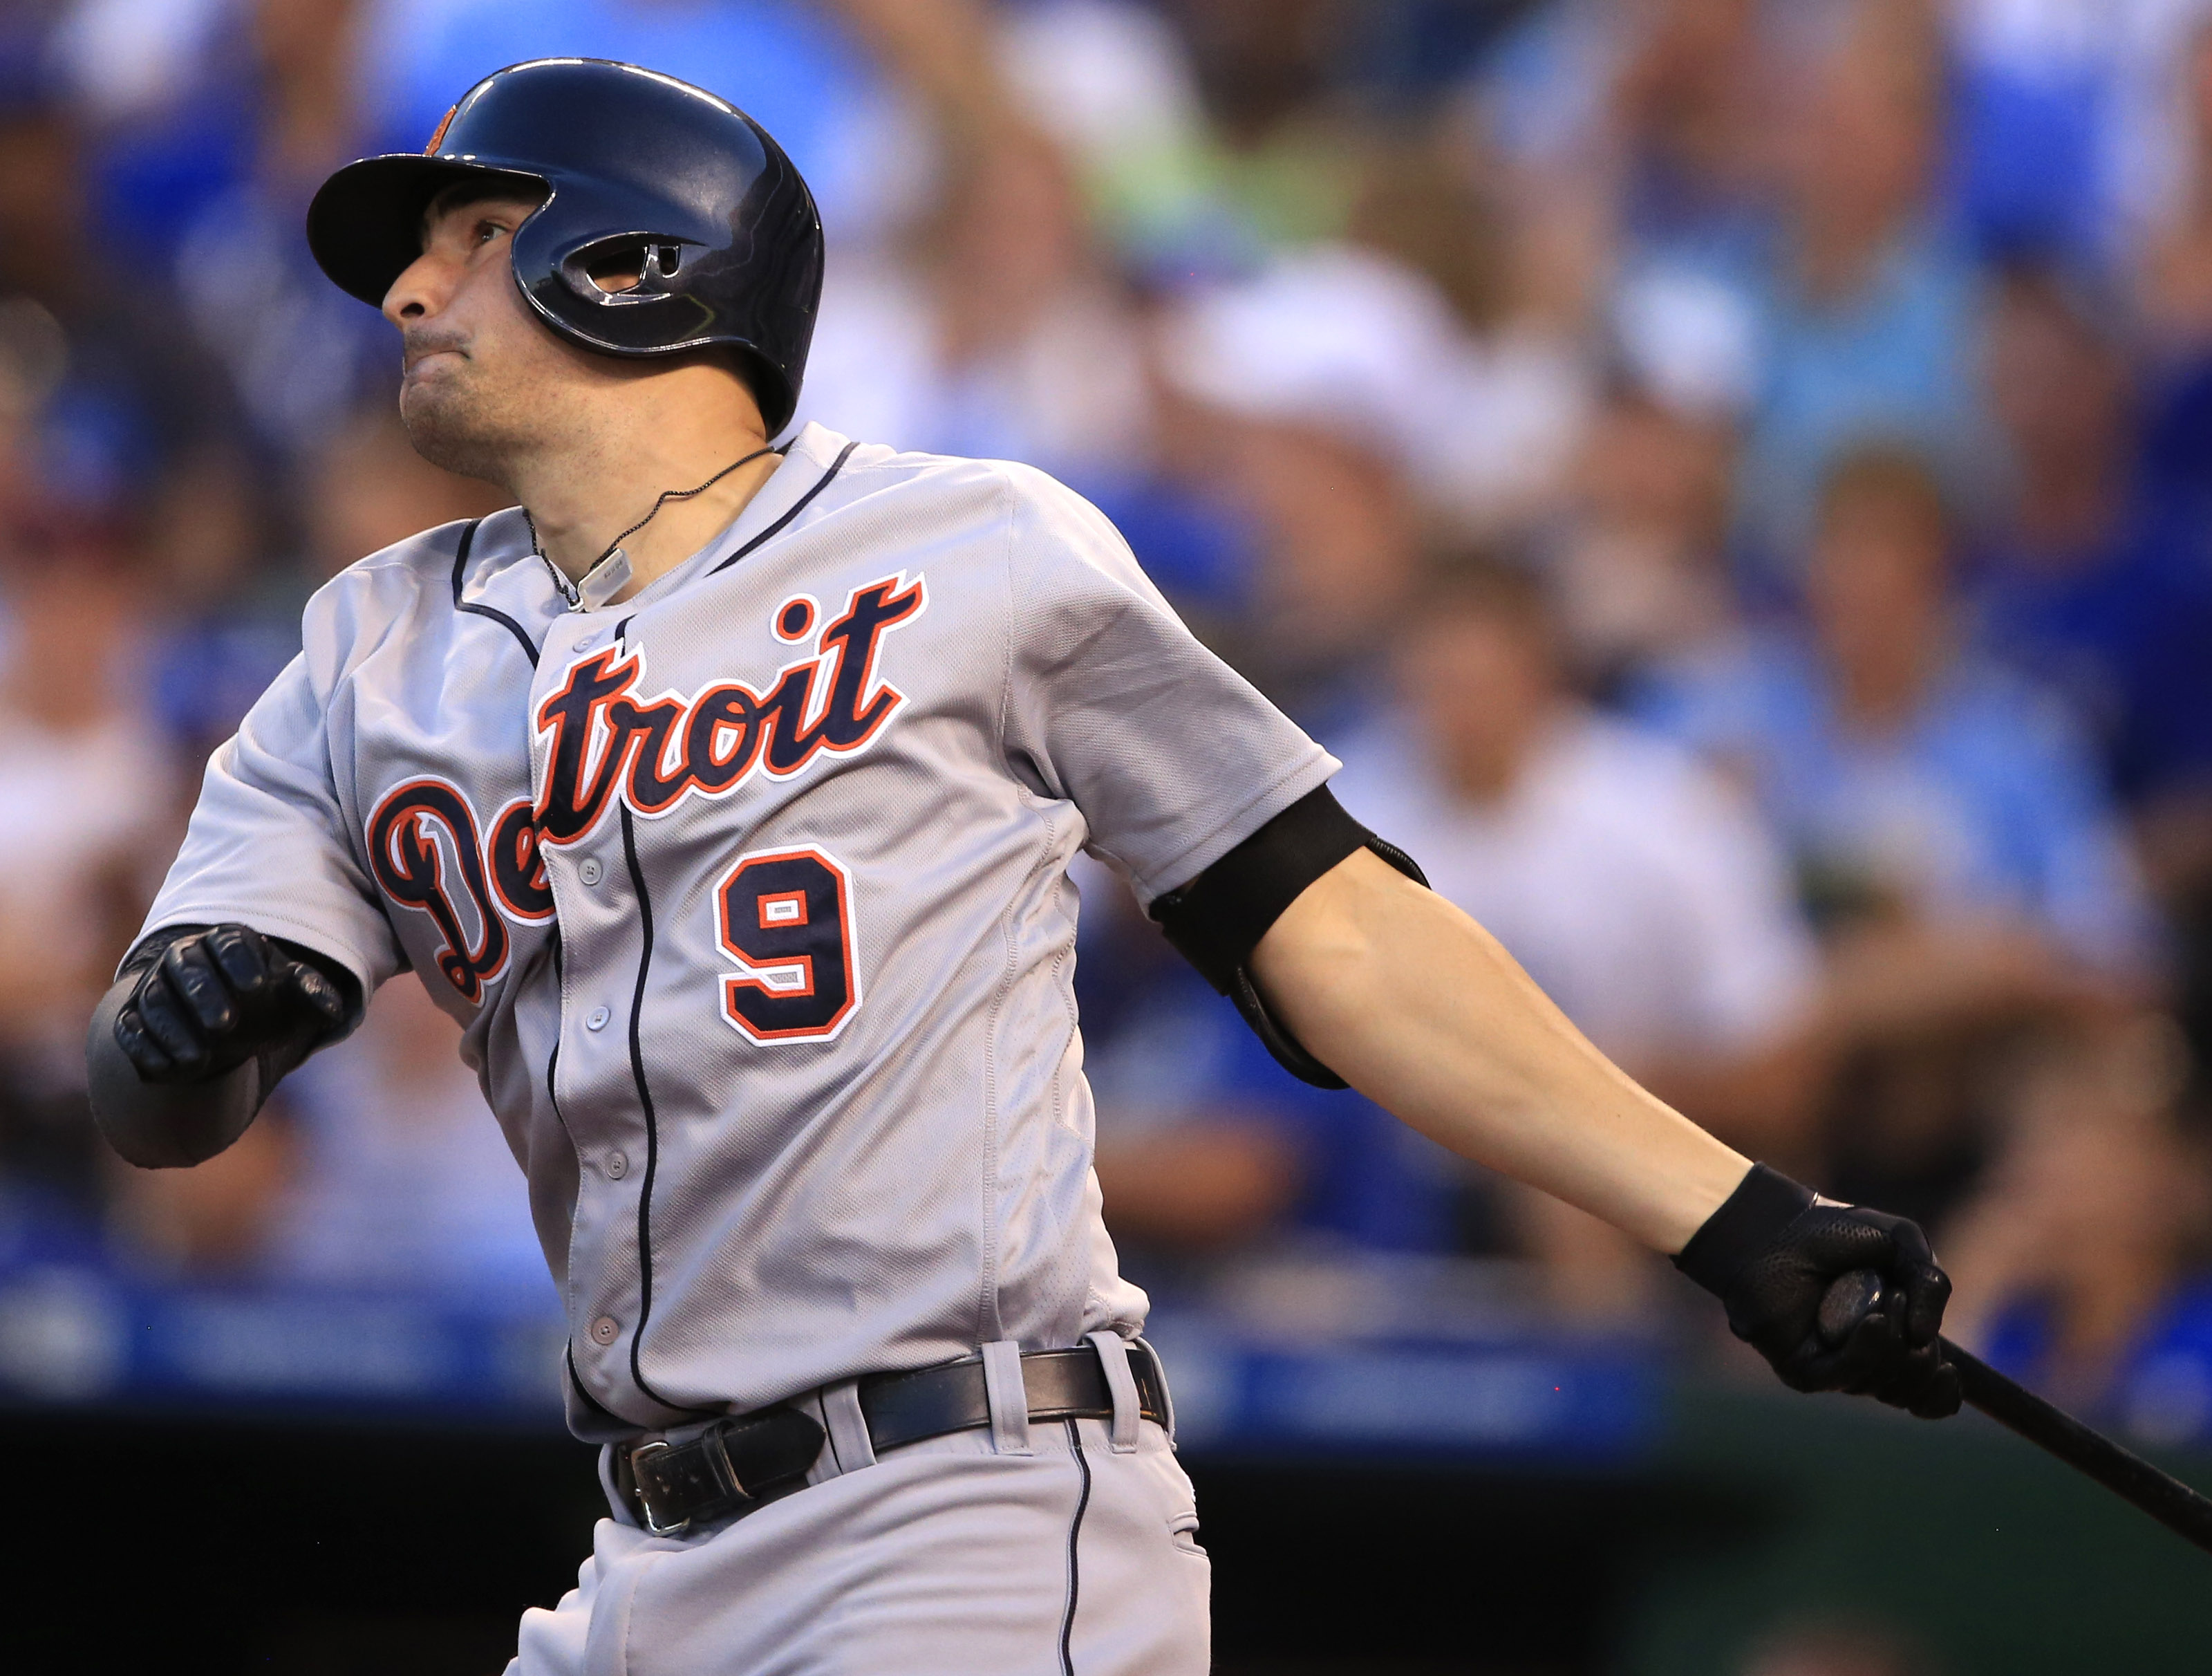 J.D. Martinez hits 3-run homer in 9th to lift Tigers to win